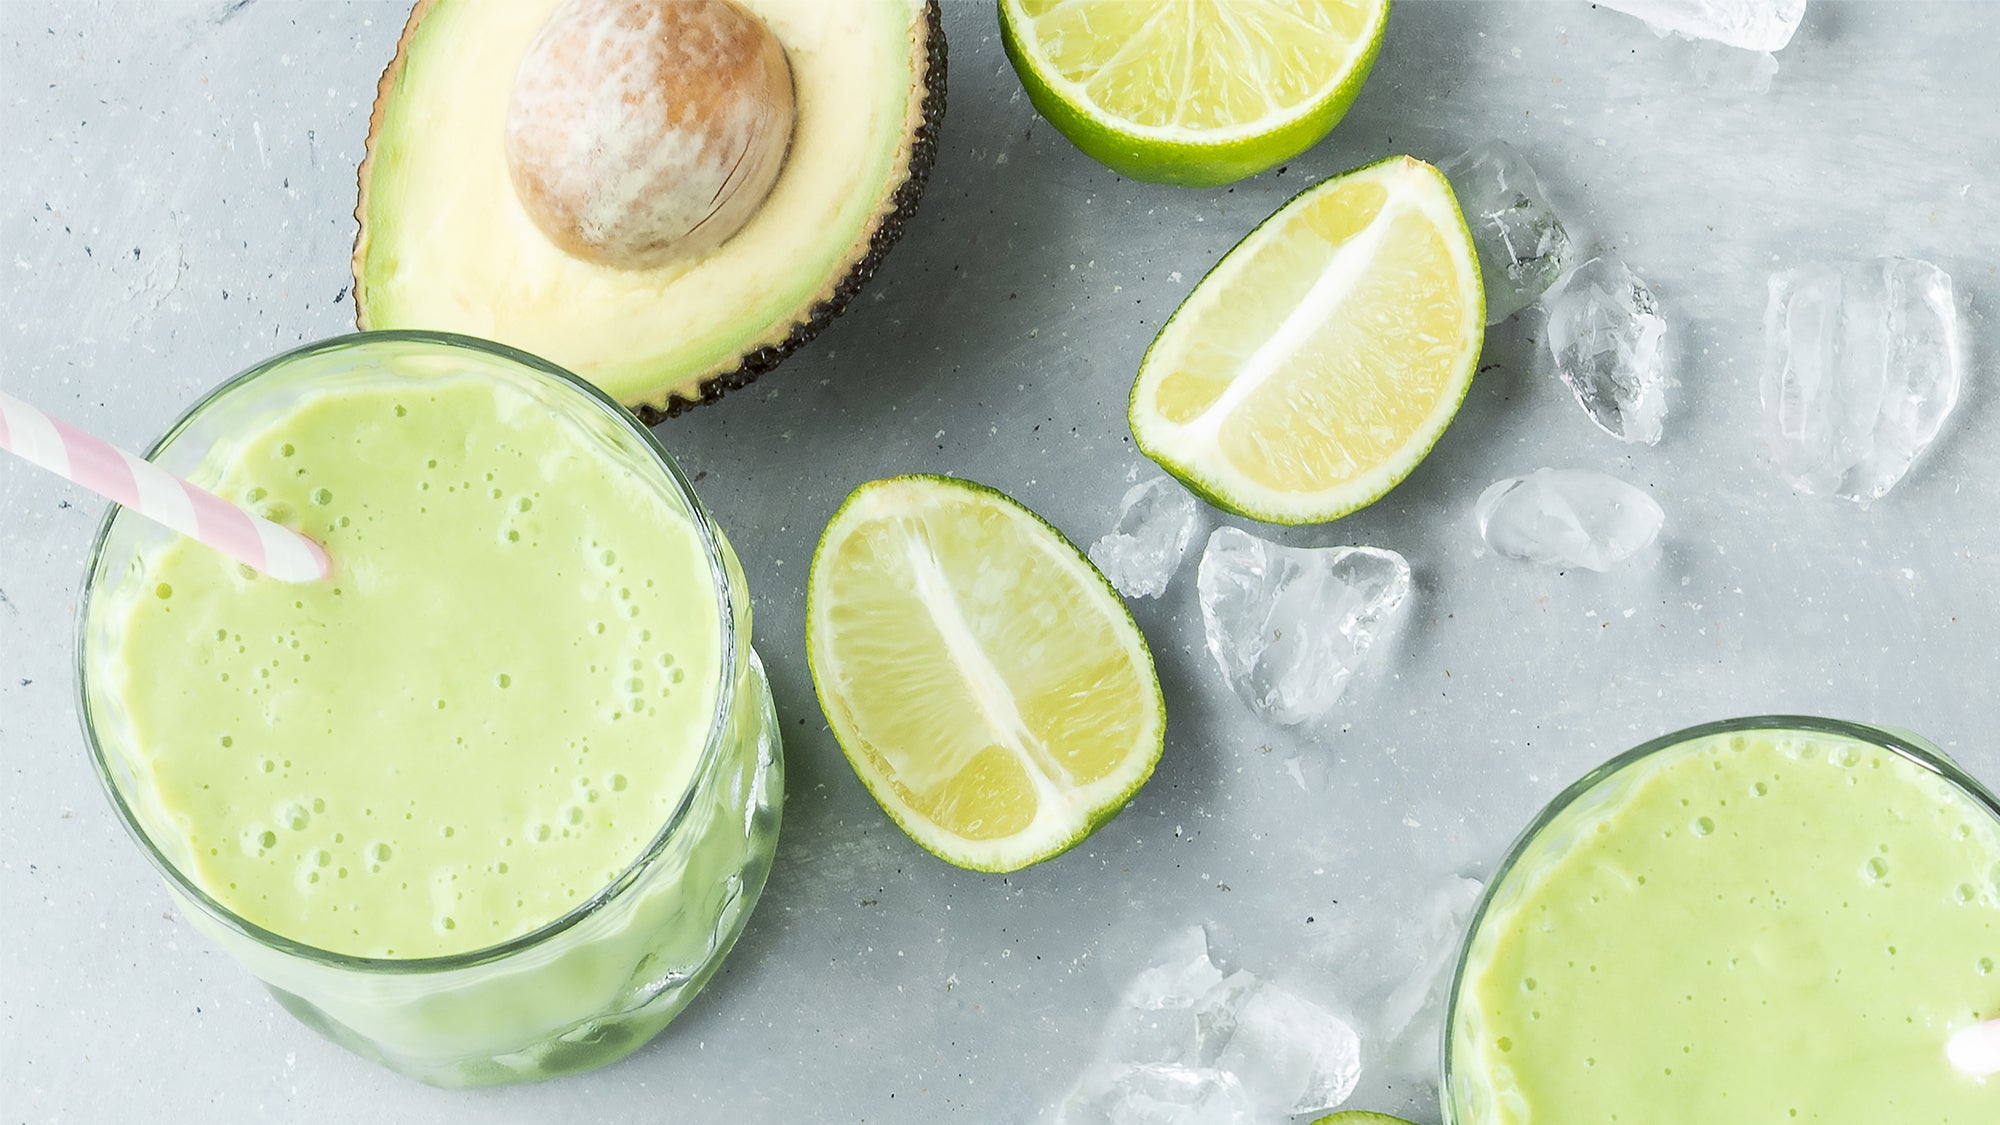 Key lime pie shake with limes and avocados